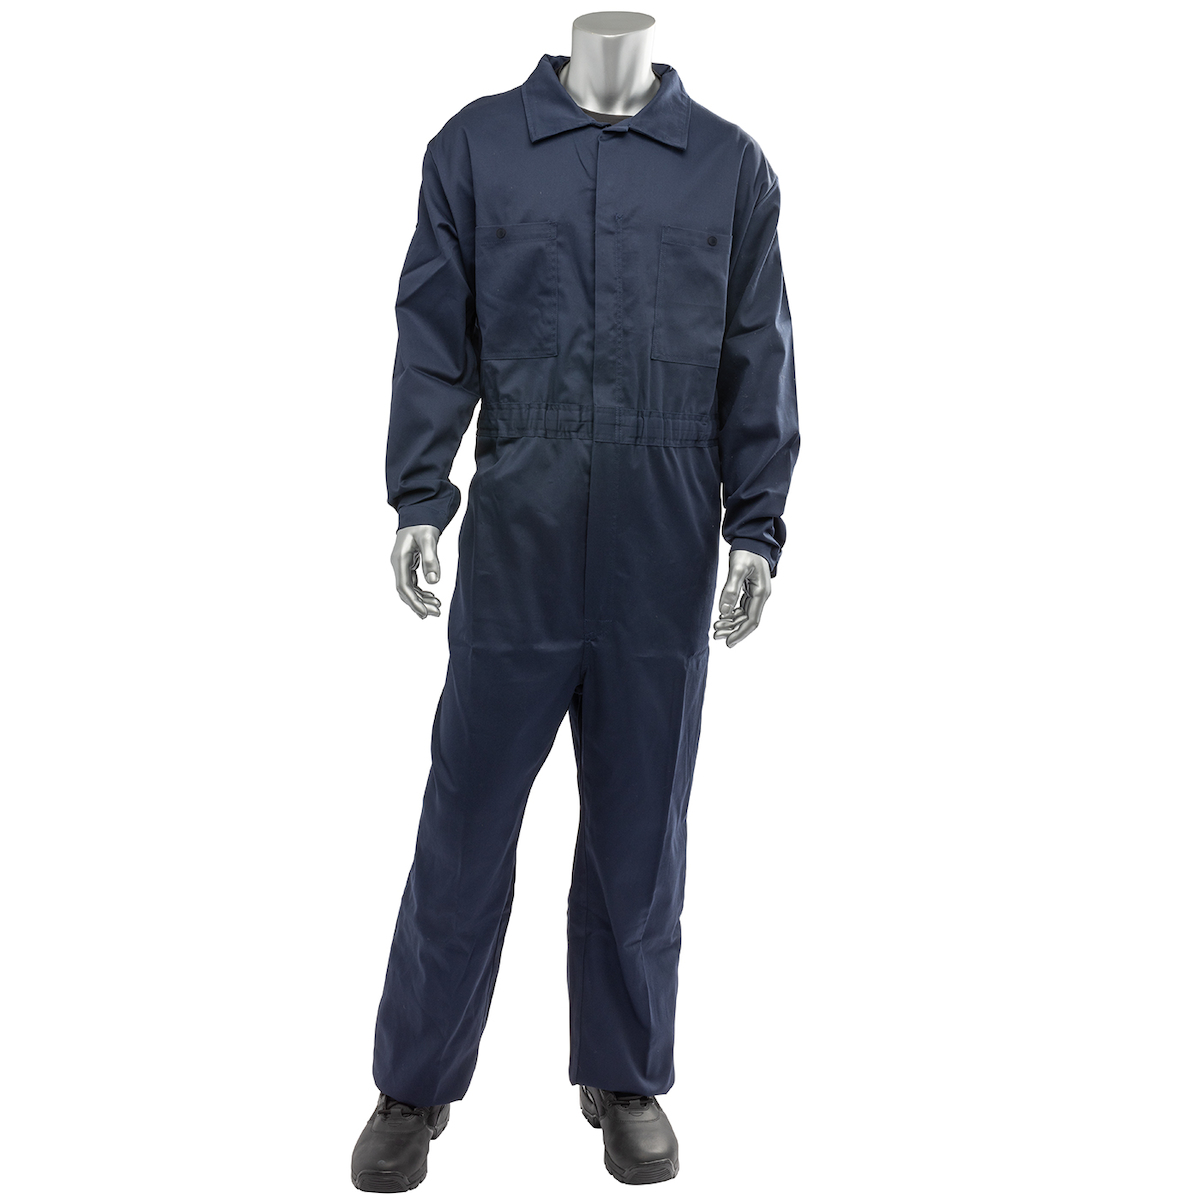 PIP® AR/FR Dual Certified Economy Coverall with Zipper Closure - Arc Flash